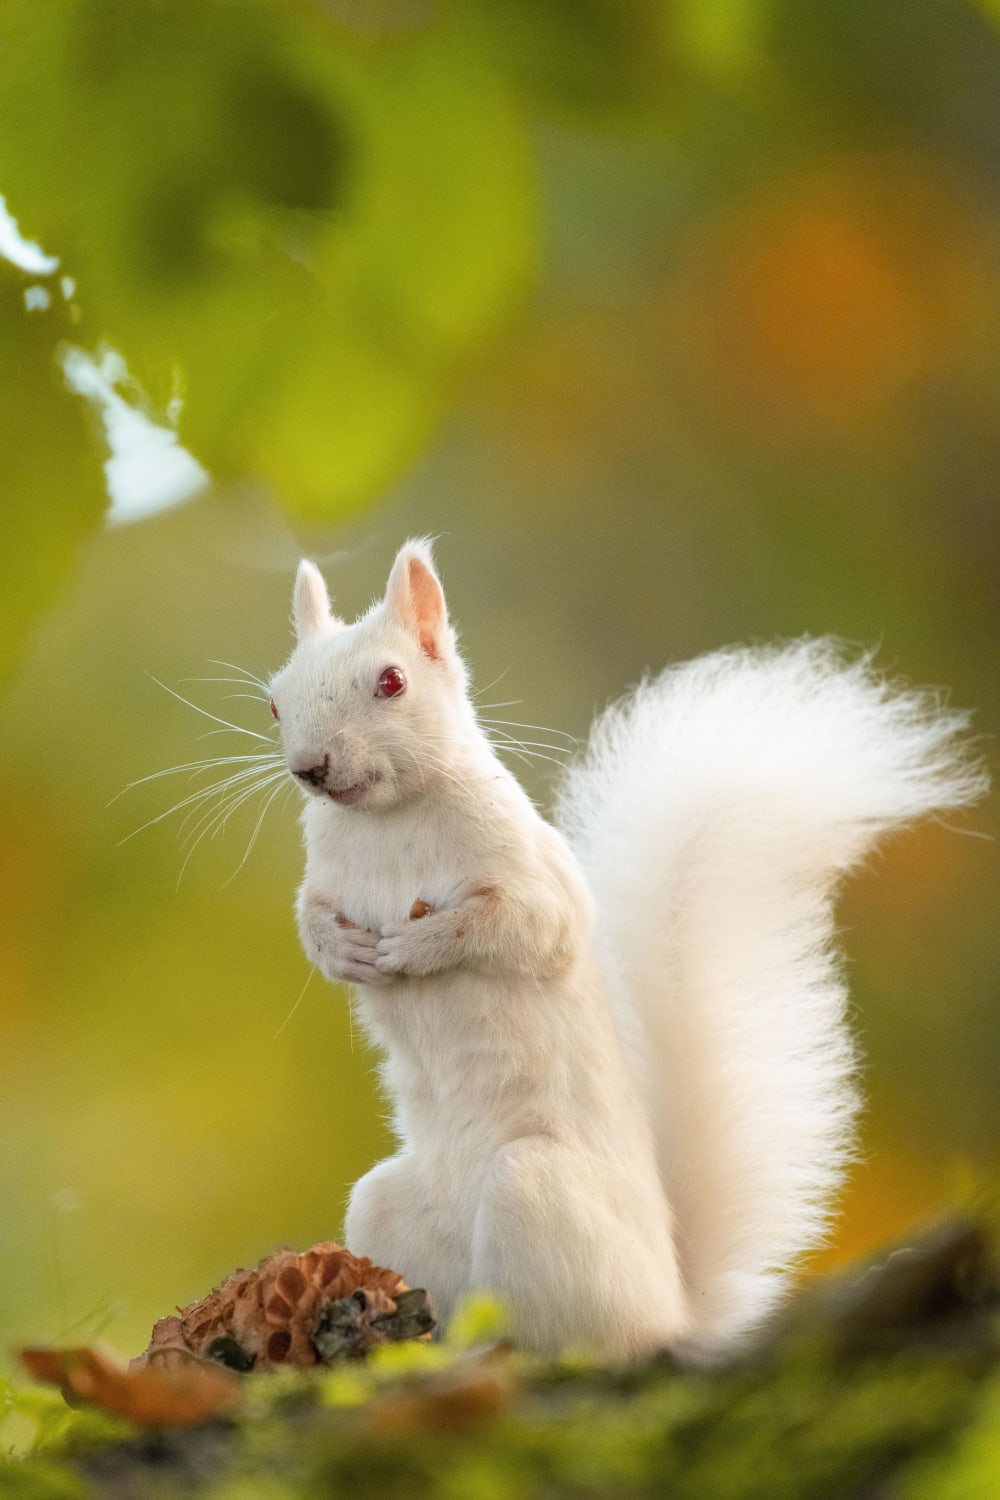 I took a picture of an albino squirrel